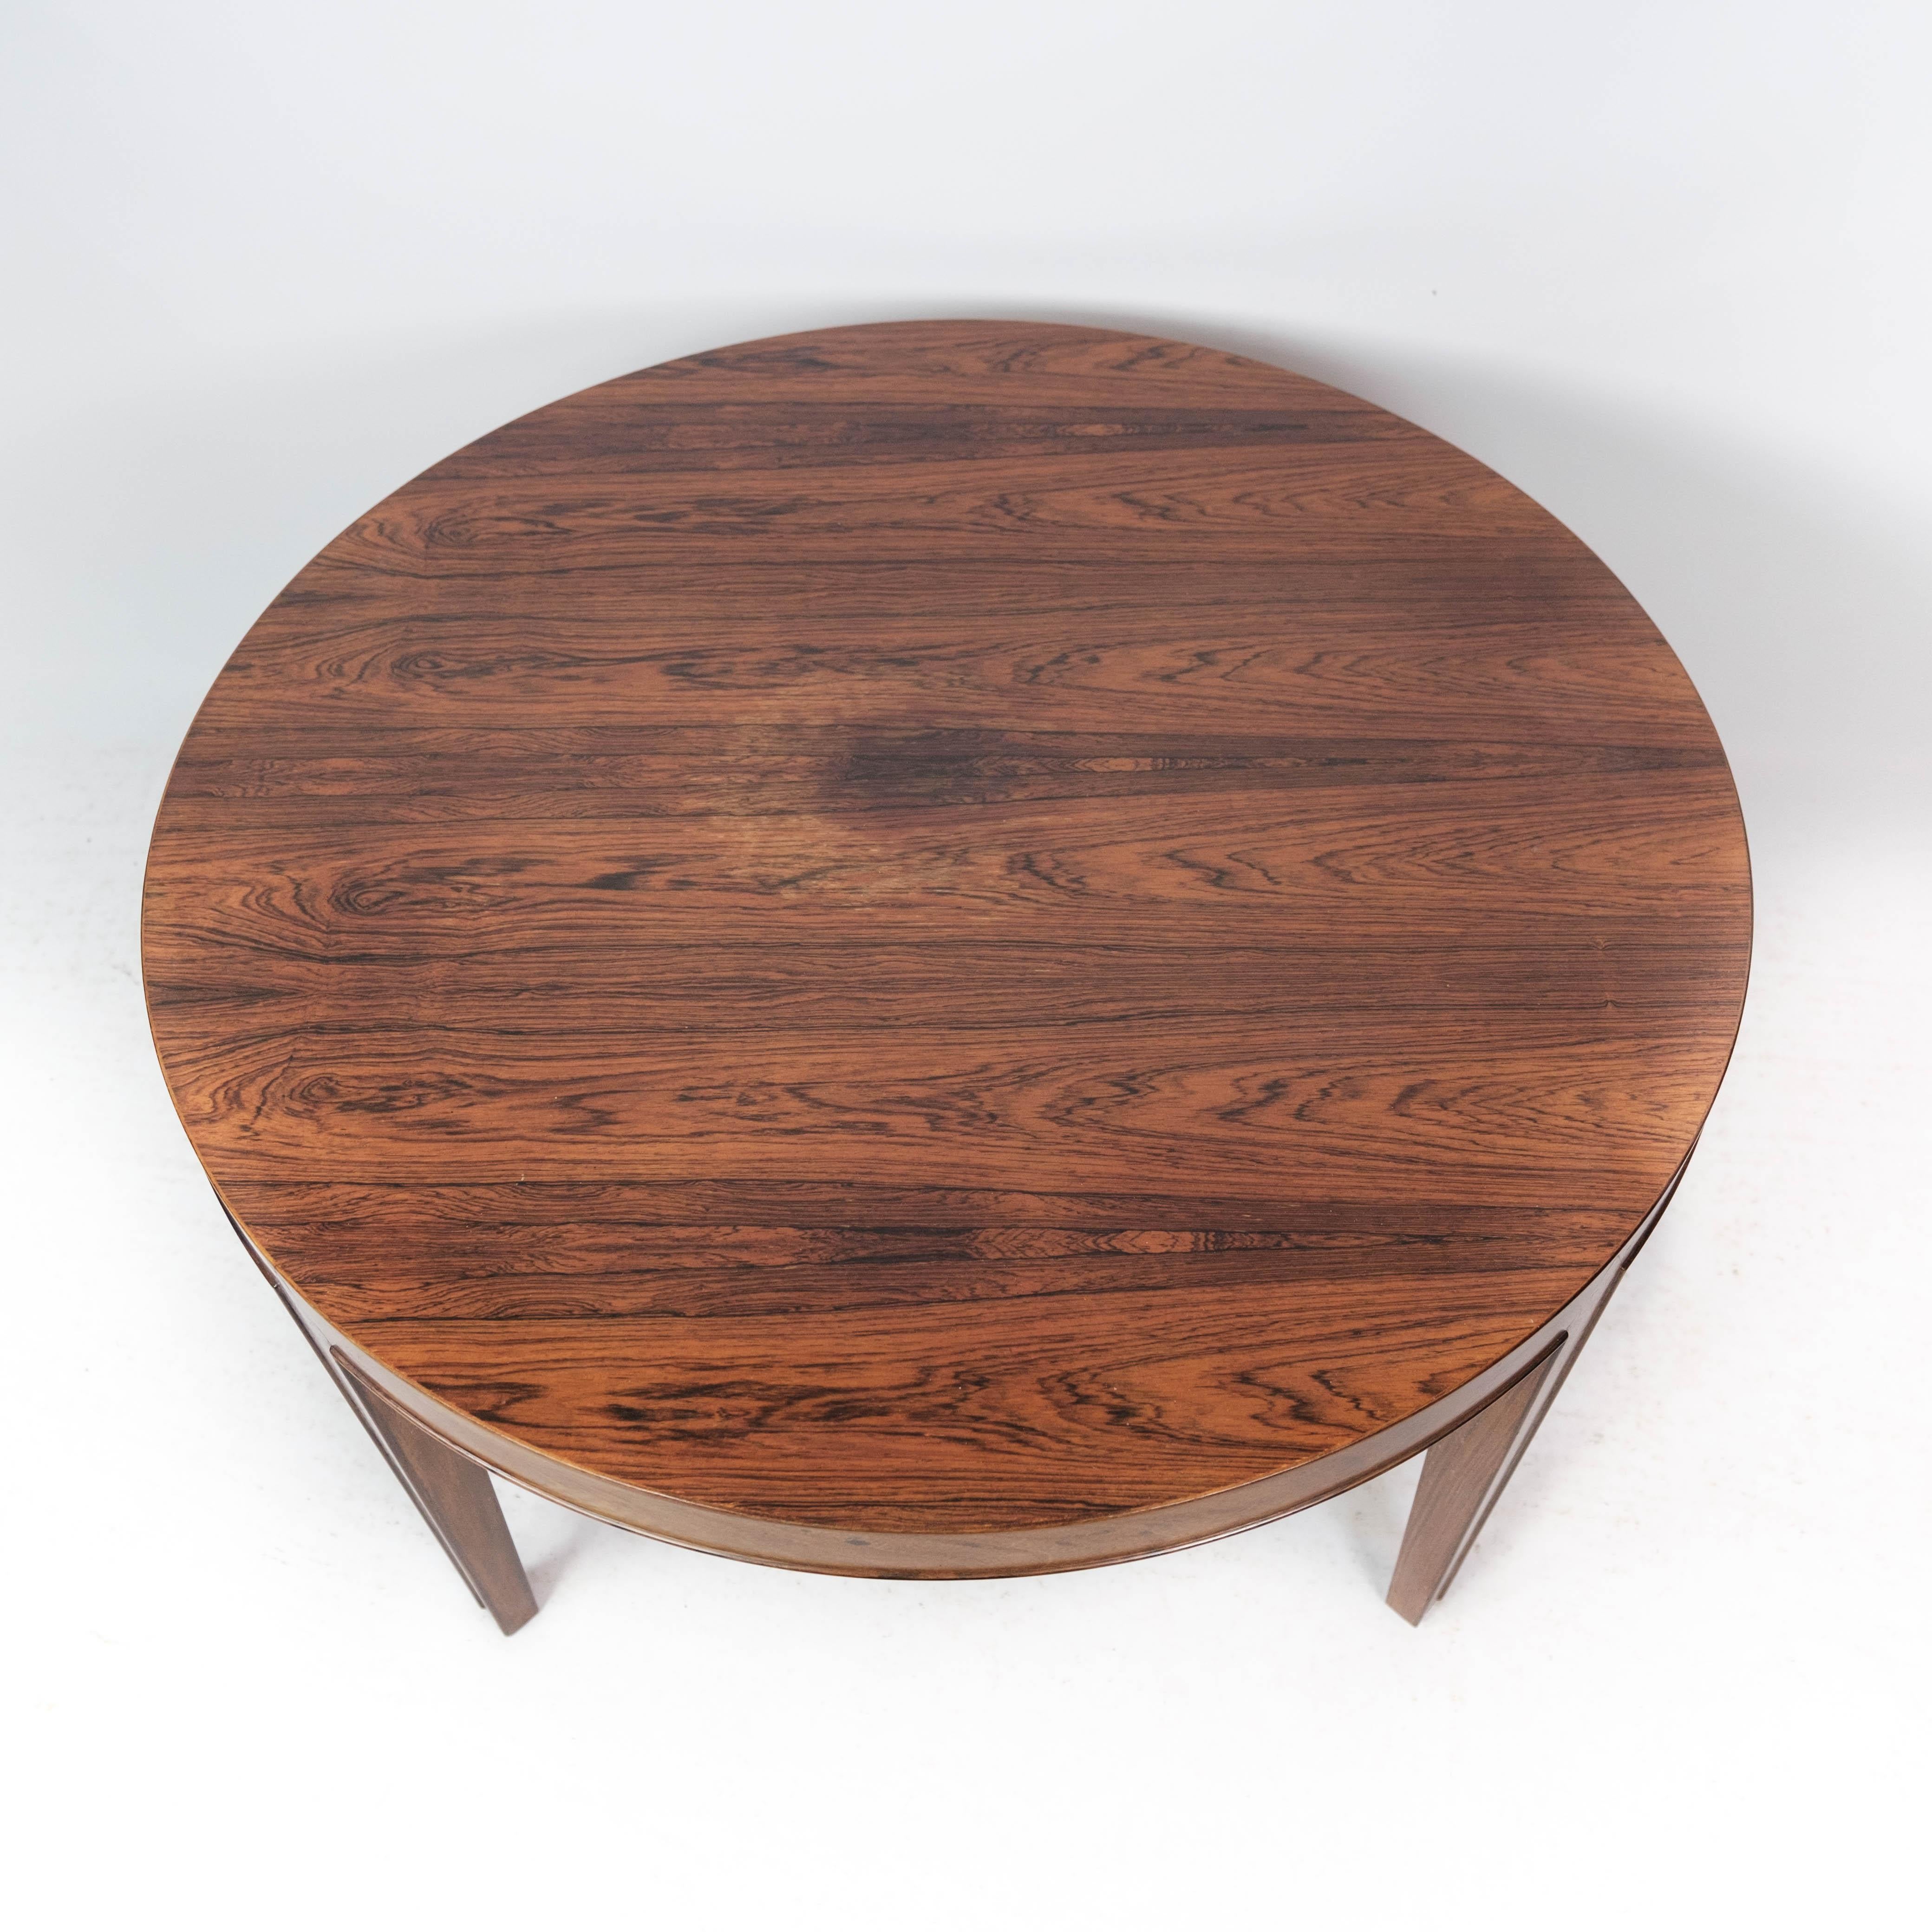 Mid-Century Modern Coffee Table Made In Rosewood By Severin Hansen Made By Haslev Møbel From 1960s For Sale